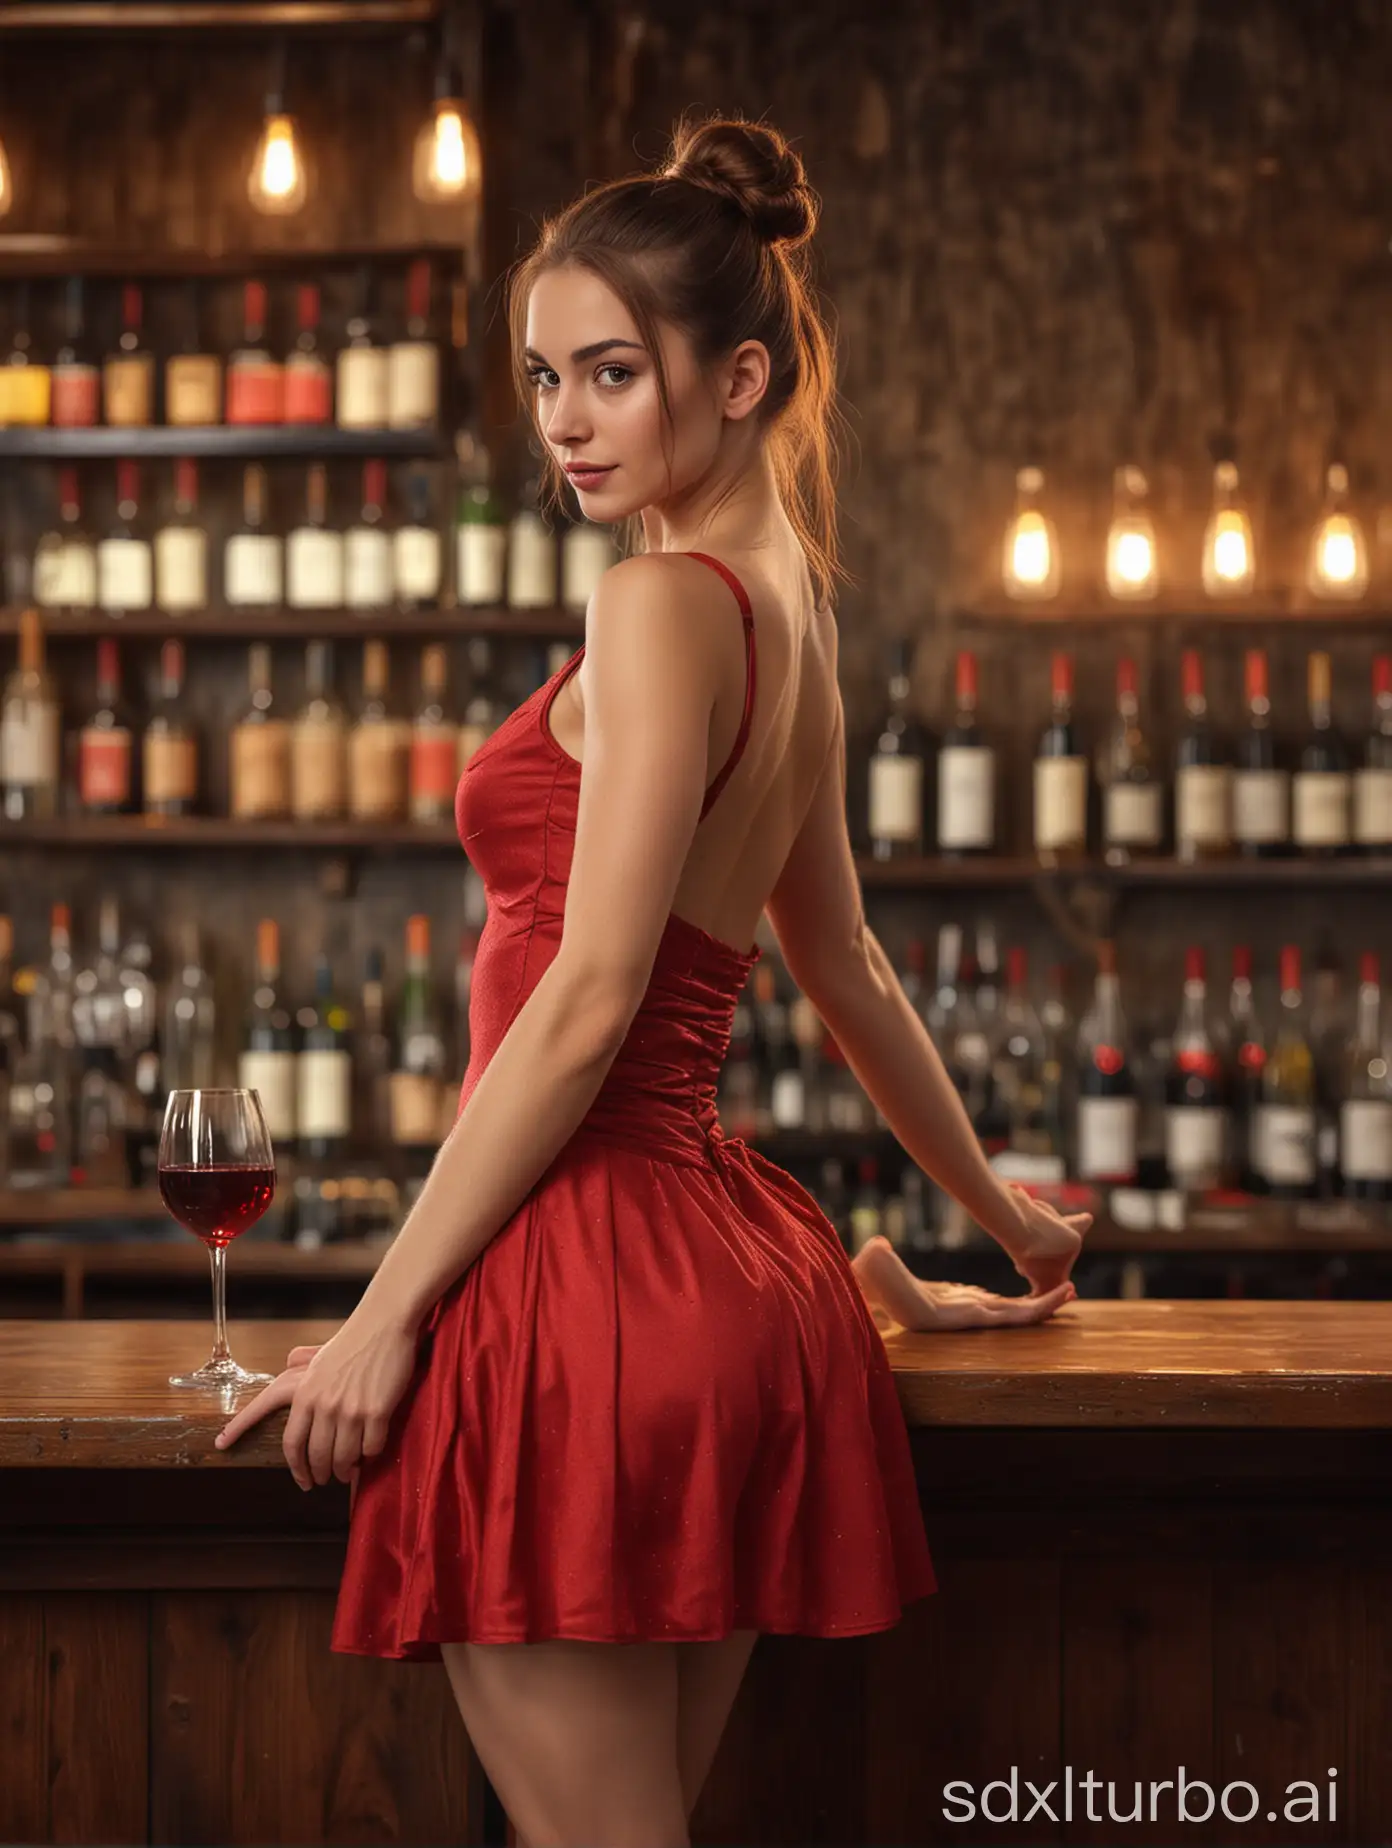 Elegant-Young-Woman-in-Red-Dress-Enjoying-Wine-at-Evening-Bar